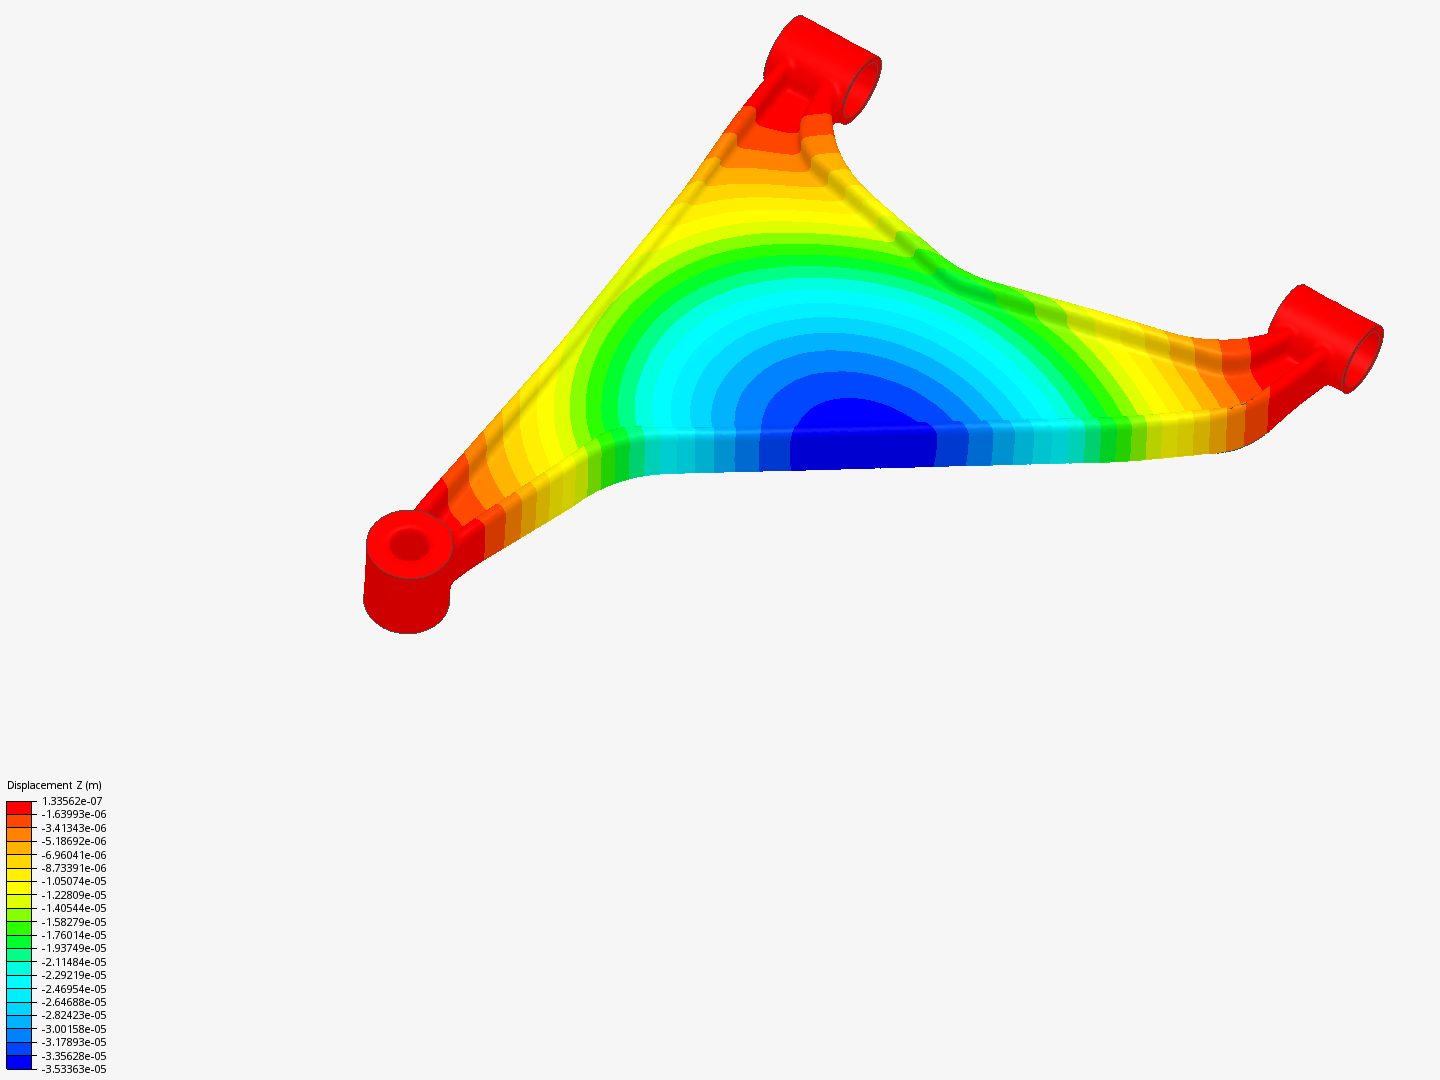 Structural analysis of lower control arm image